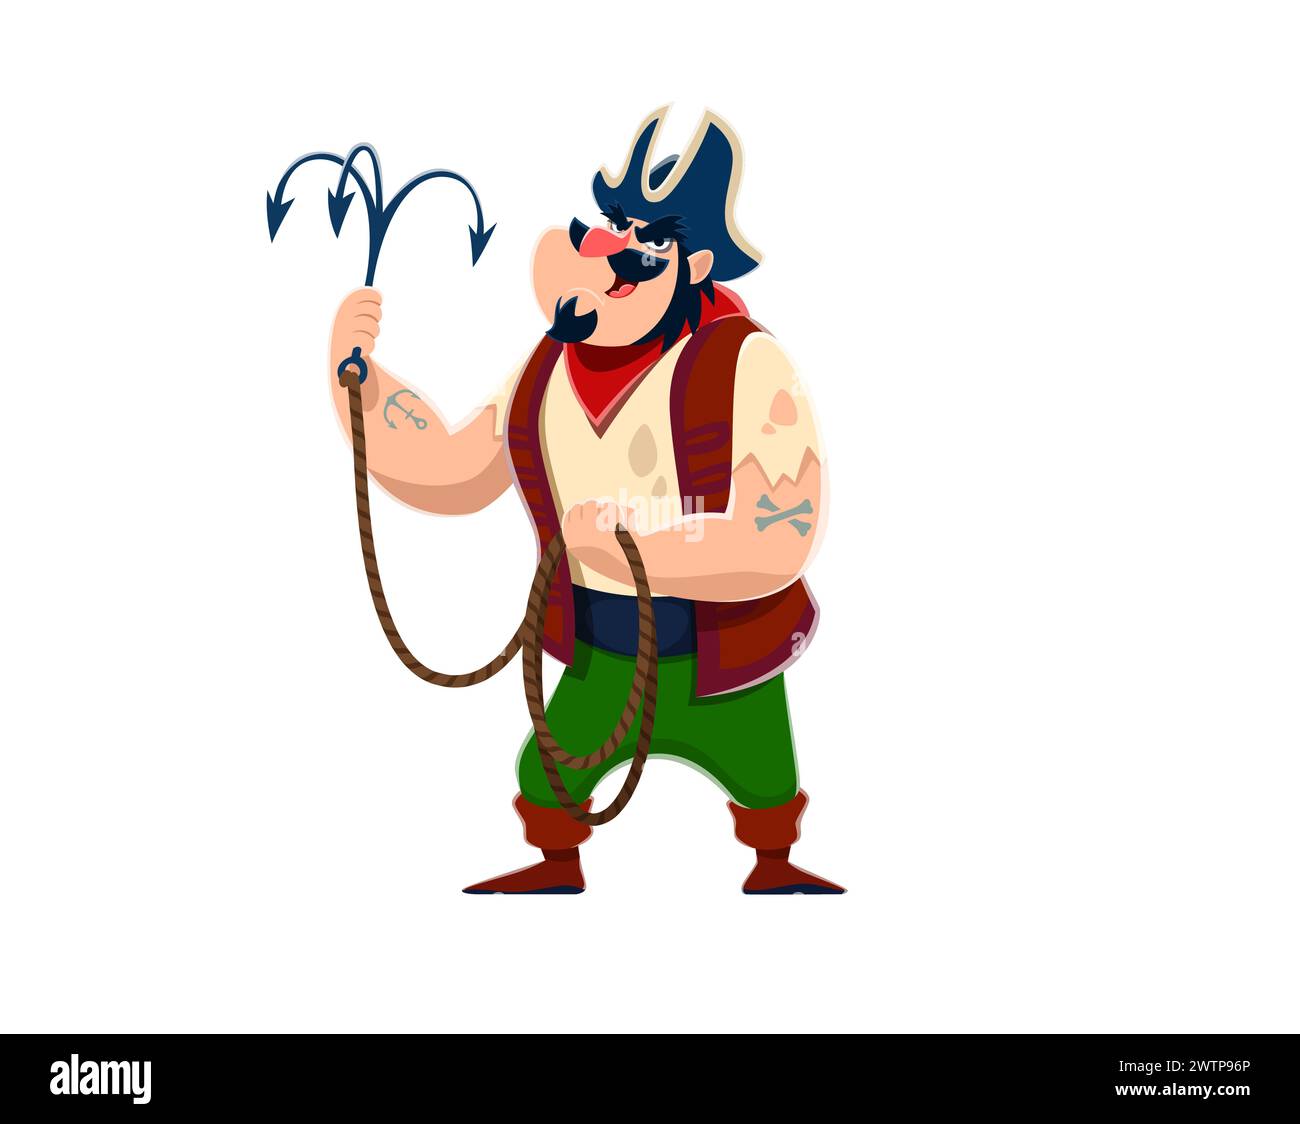 Dog pirate Cut Out Stock Images & Pictures - Page 3 - Alamy